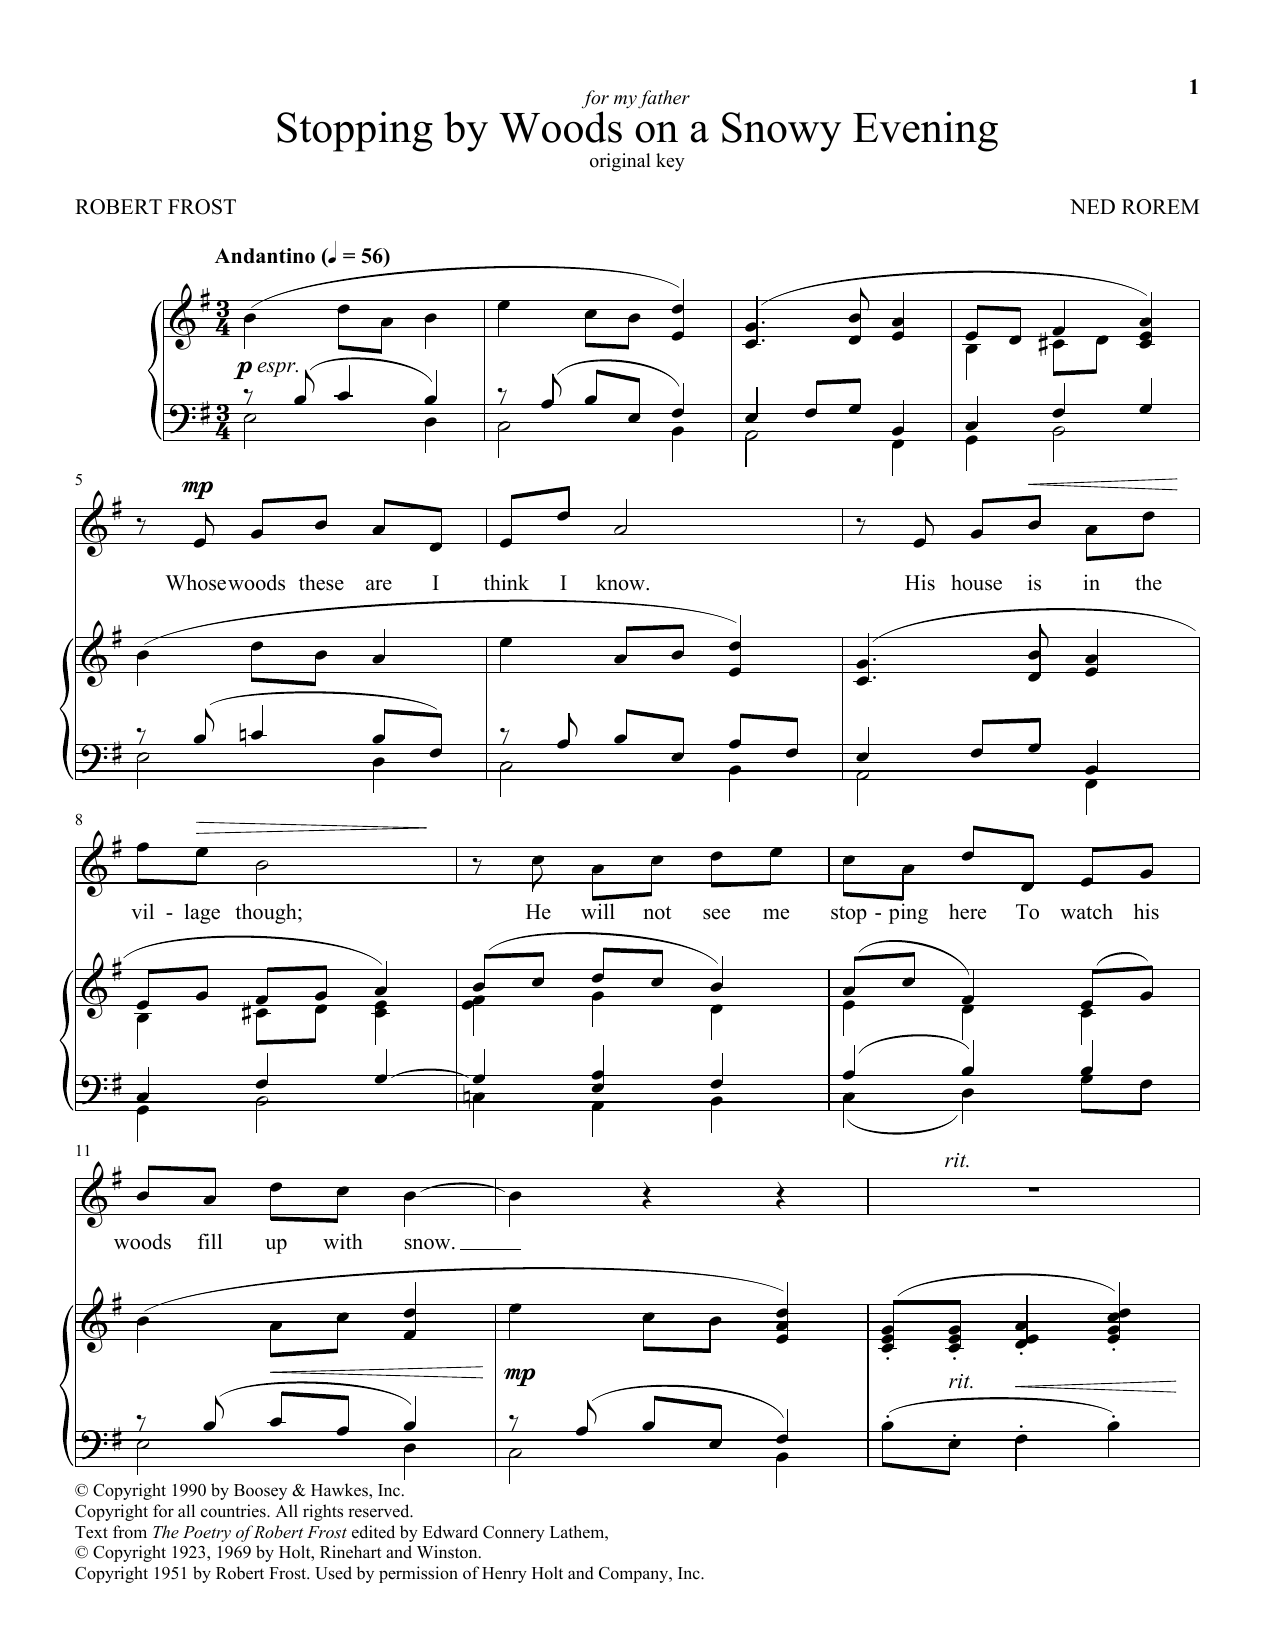 Download Robert Frost Stopping By Woods On A Snowy Evening Sheet Music